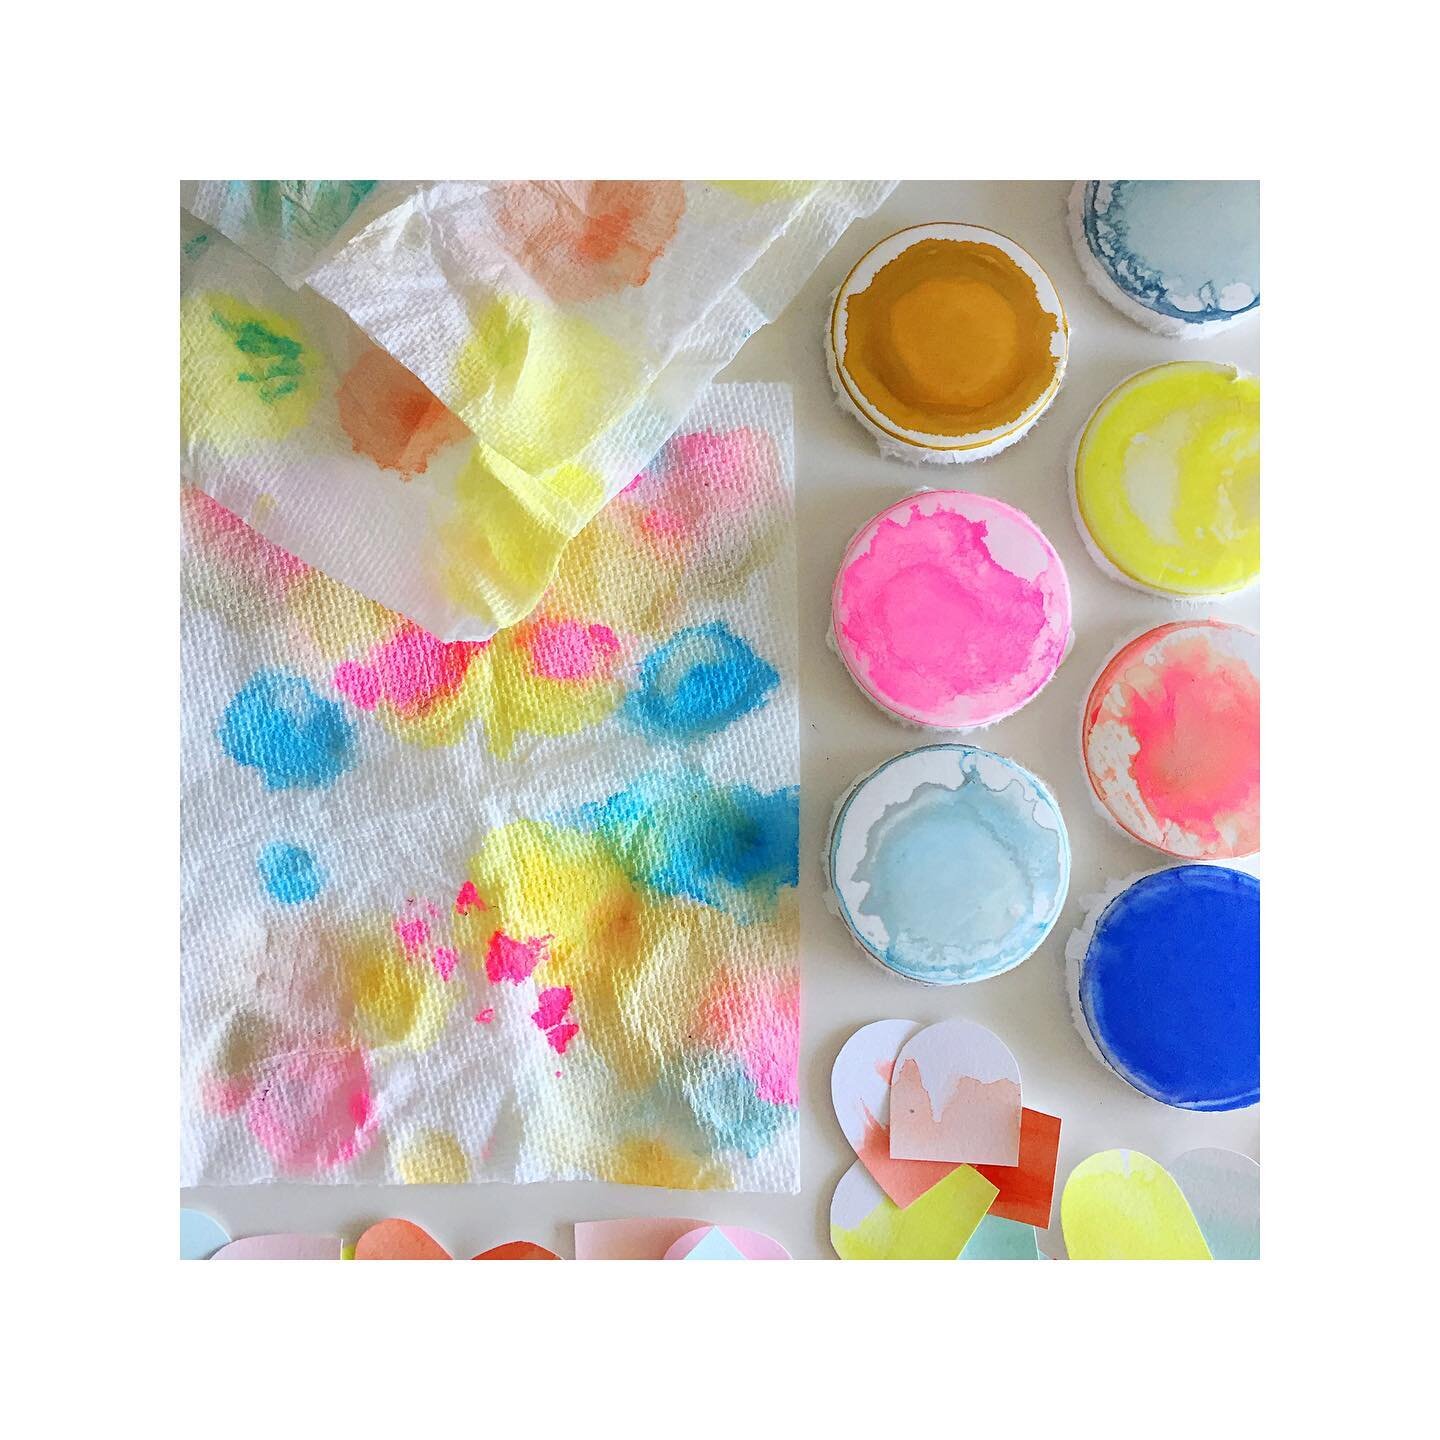 Sometimes the mess leftover from the process is a thing of beauty all on its own.

#behindthescenes #process #colornerdsociety #colorlover #studioscenes